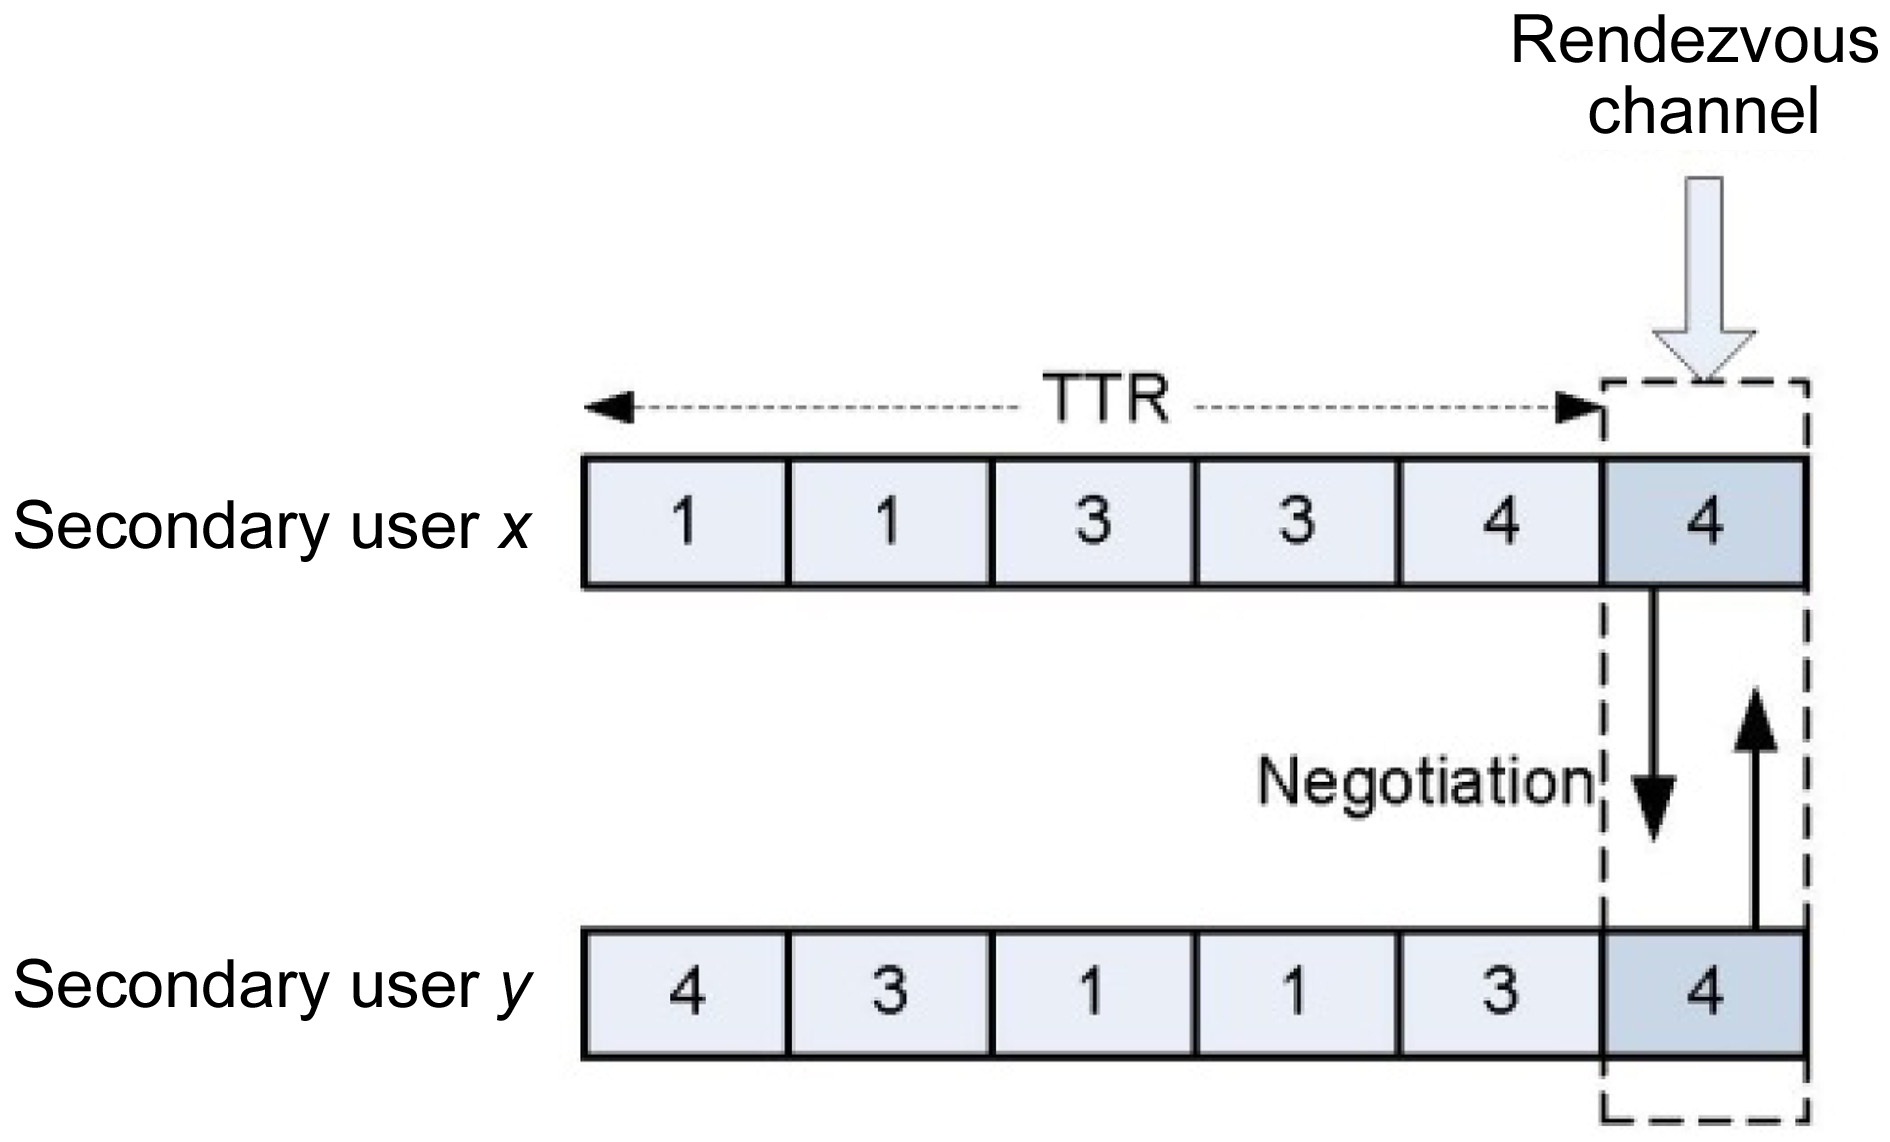 The basic operation of a channel hopping protocol. TTR: time to rendezvous.